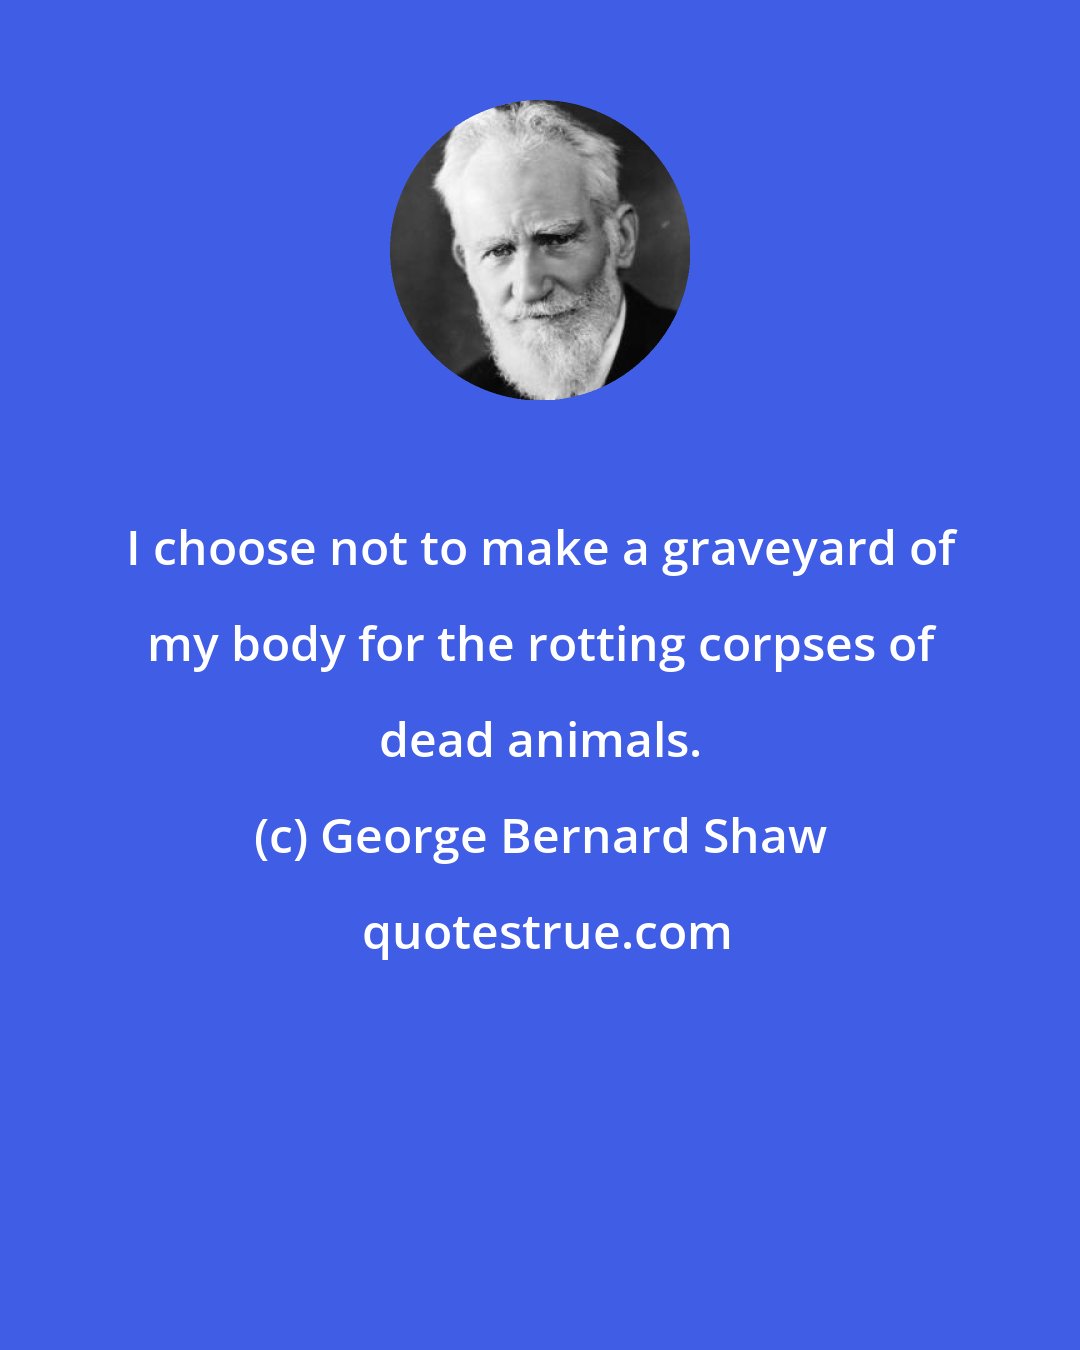 George Bernard Shaw: I choose not to make a graveyard of my body for the rotting corpses of dead animals.